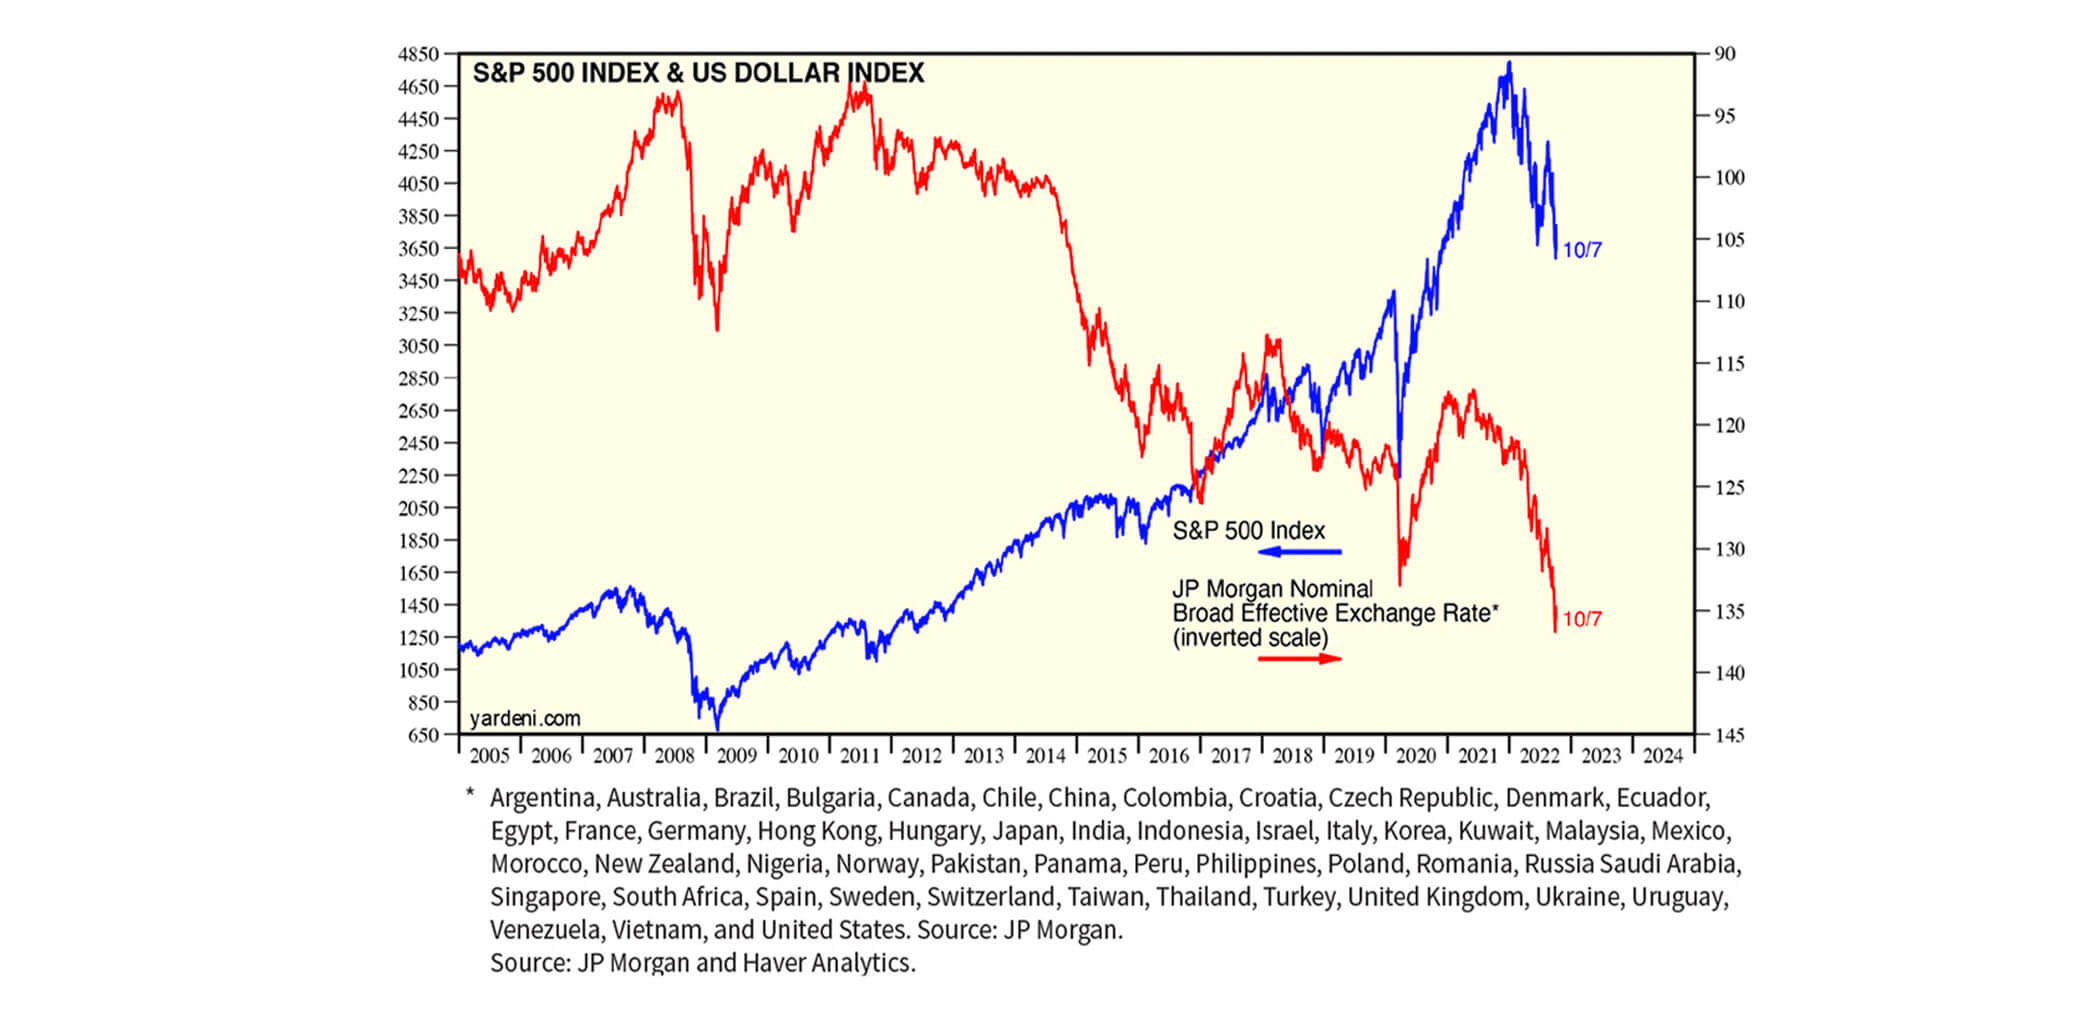 A graph showing the S & P Index and the Us Dollar Index compared.